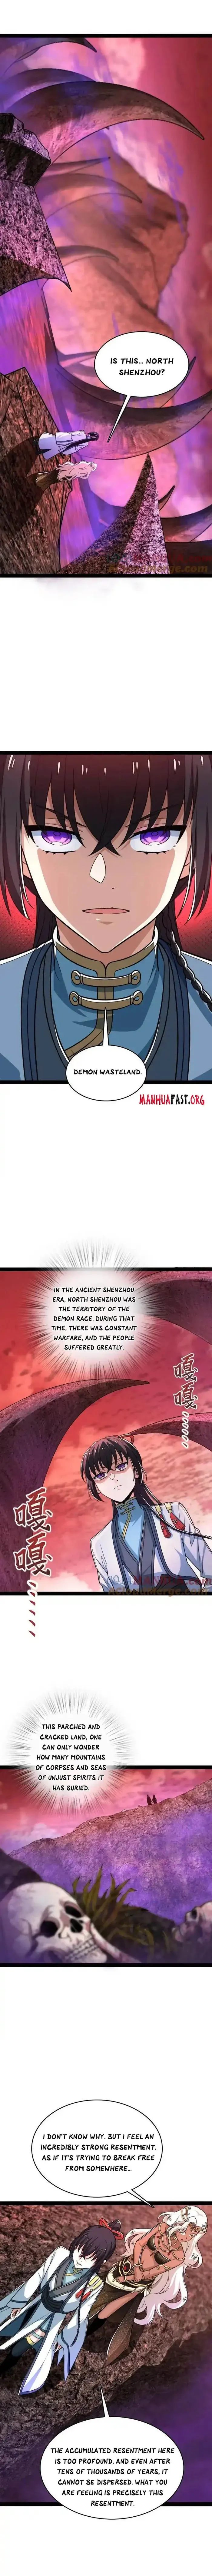 Life of a War Emperor After Retirement Chapter 297 page 2